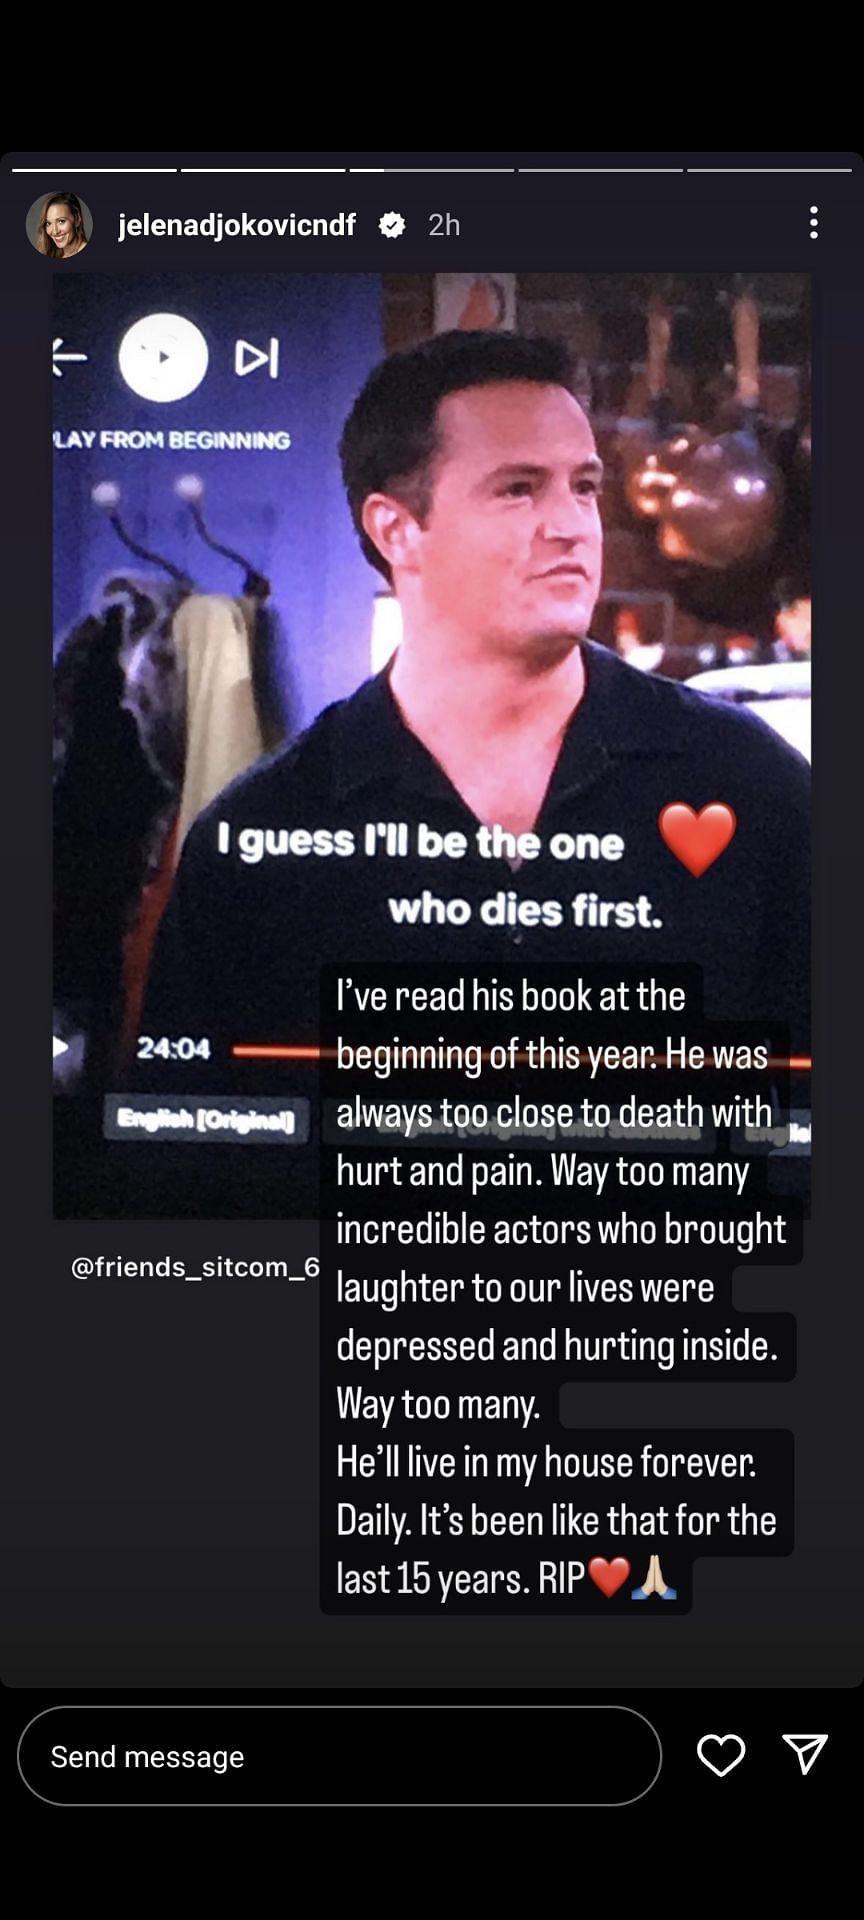 Jelena Djokovic&#039;s Instagram story, with a tribute to the late Mathew Perry.